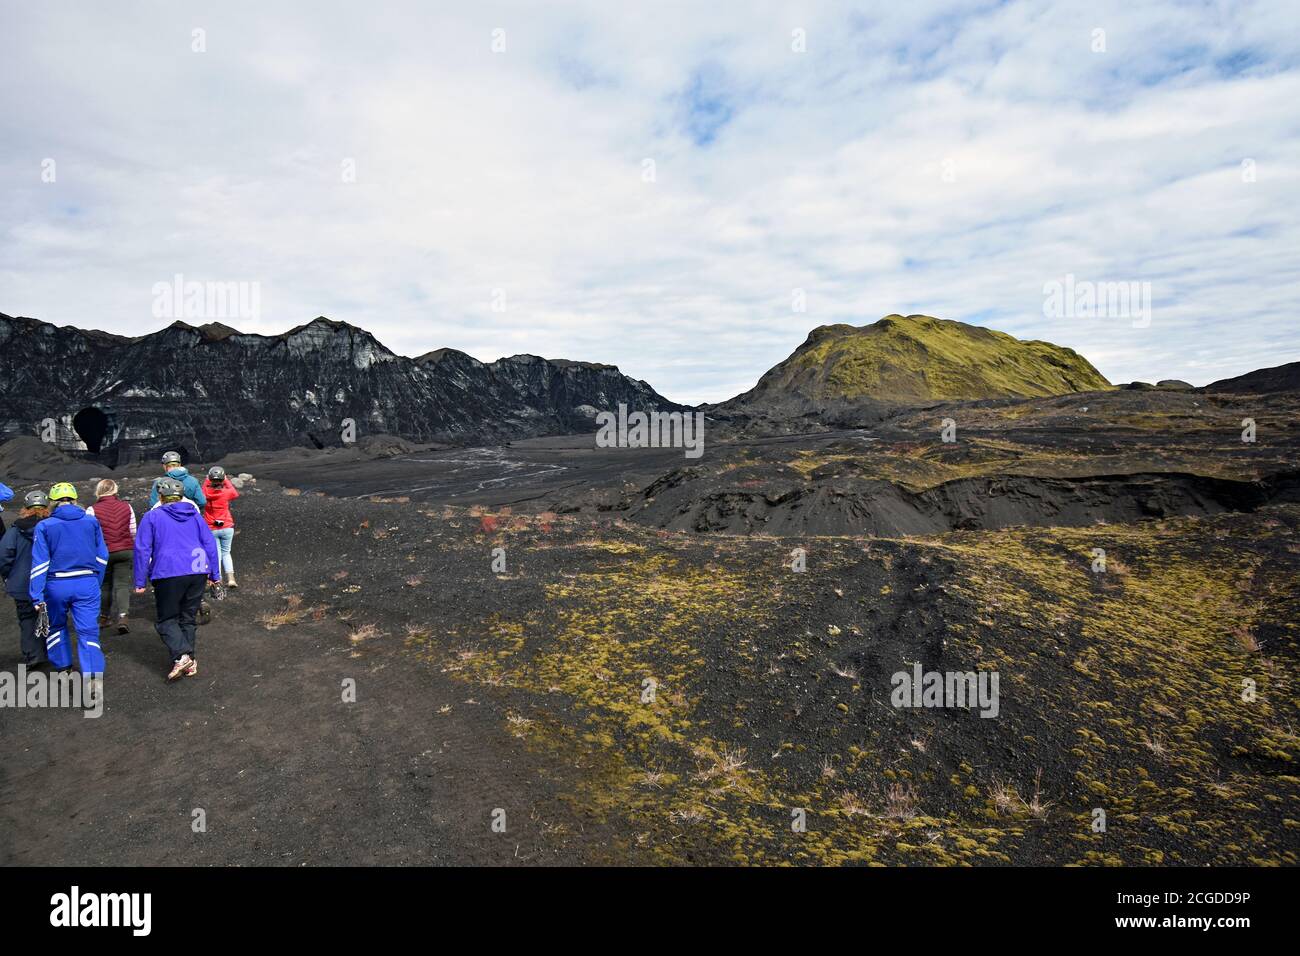 A tourist group in brightly coloured clothing contrast with the black volcanic sand glacial outwash plain for the Kotlujokull Glacier. South Iceland Stock Photo